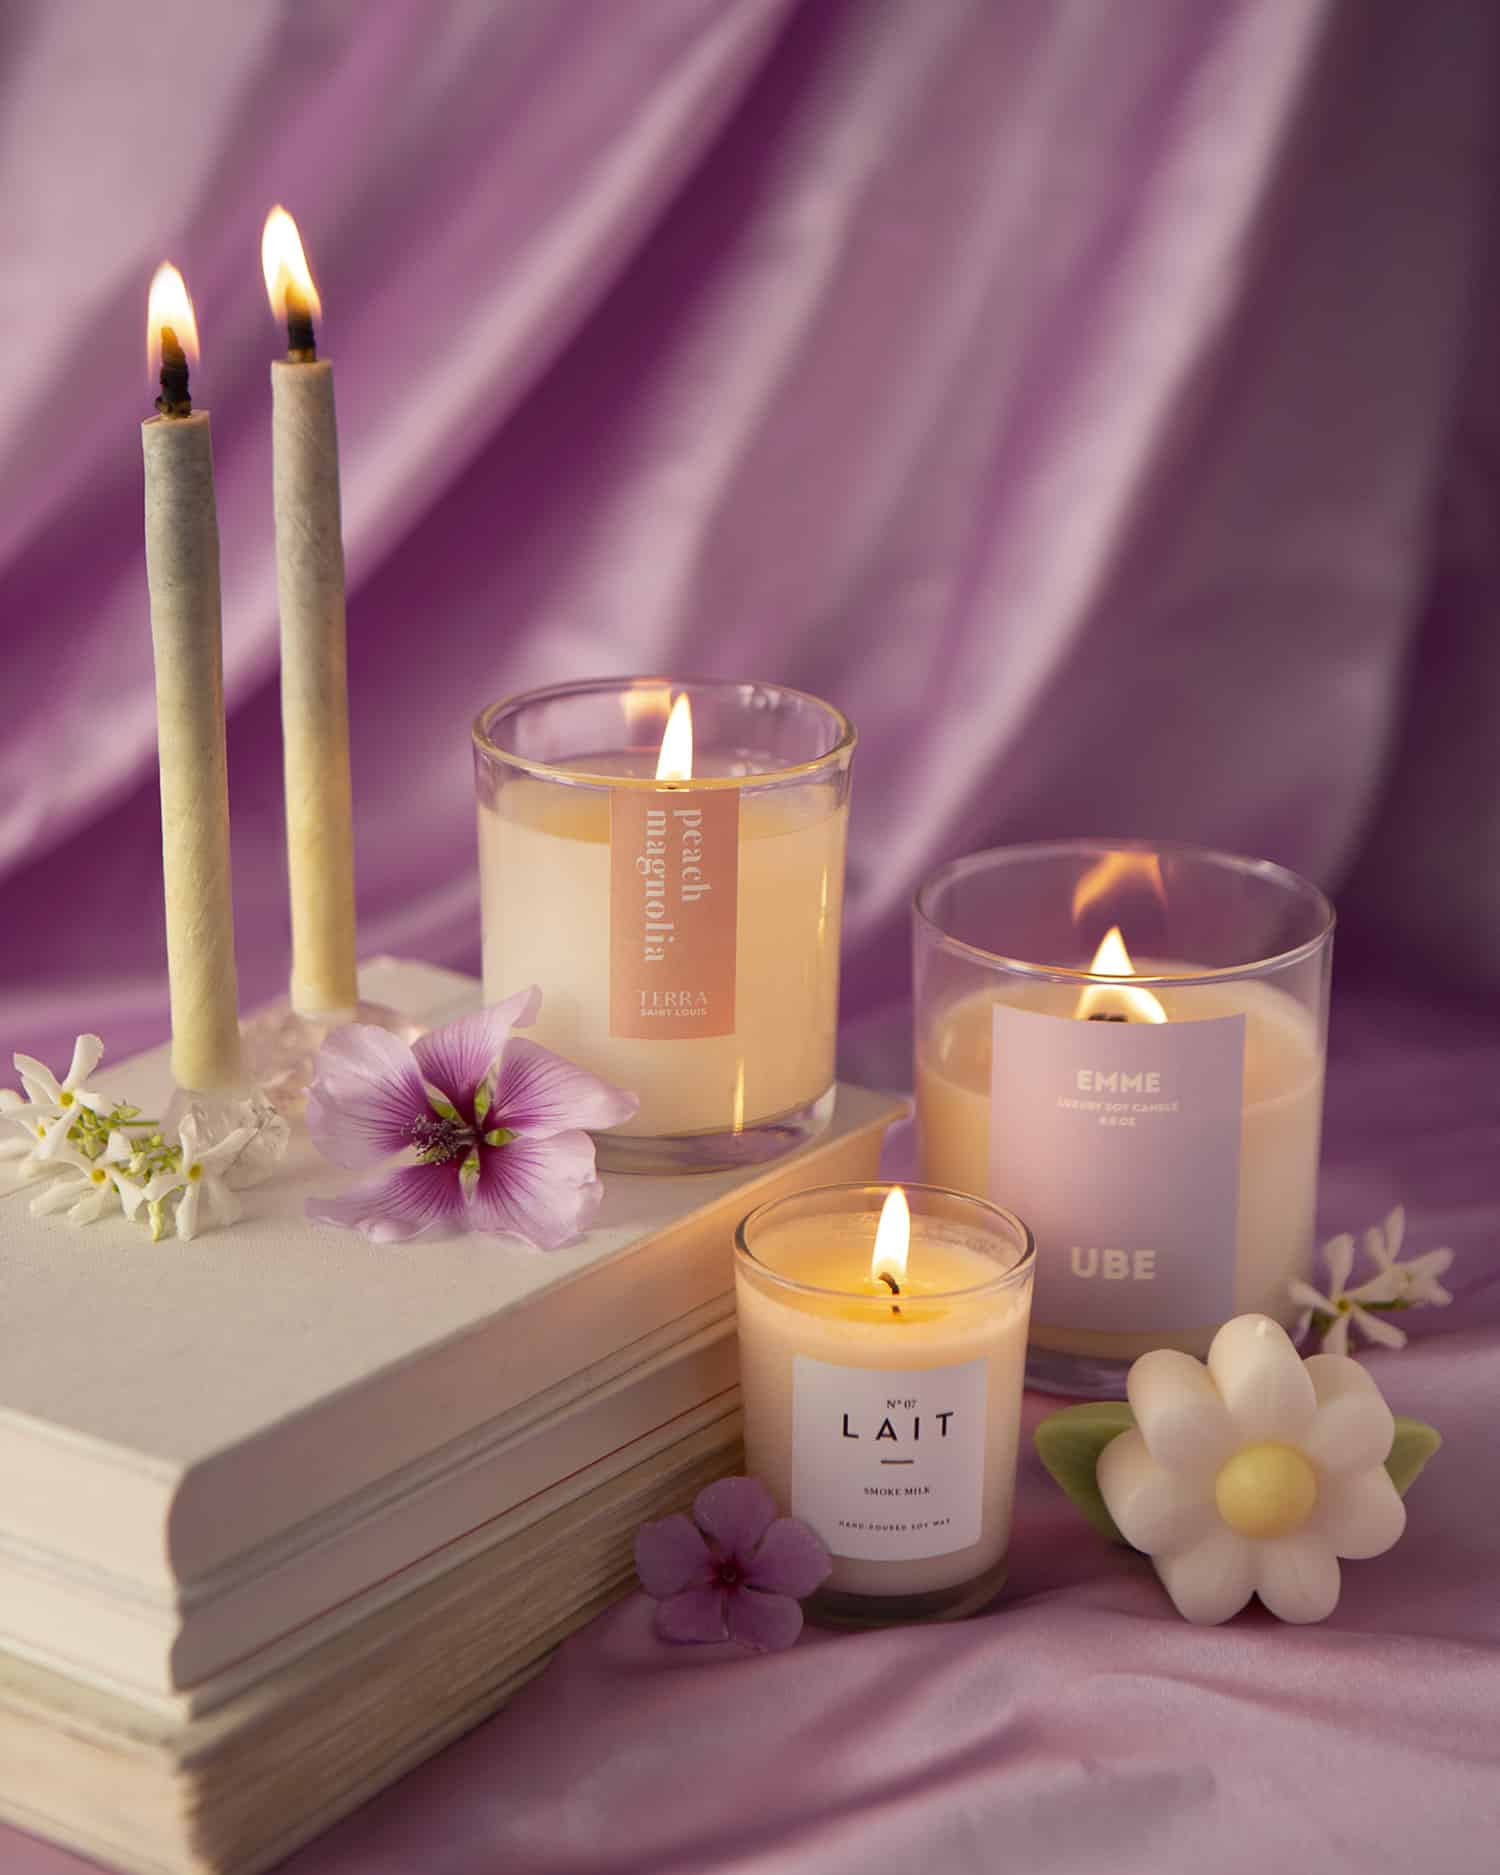 Decorative candle luxury brand, as a gift, present, for home